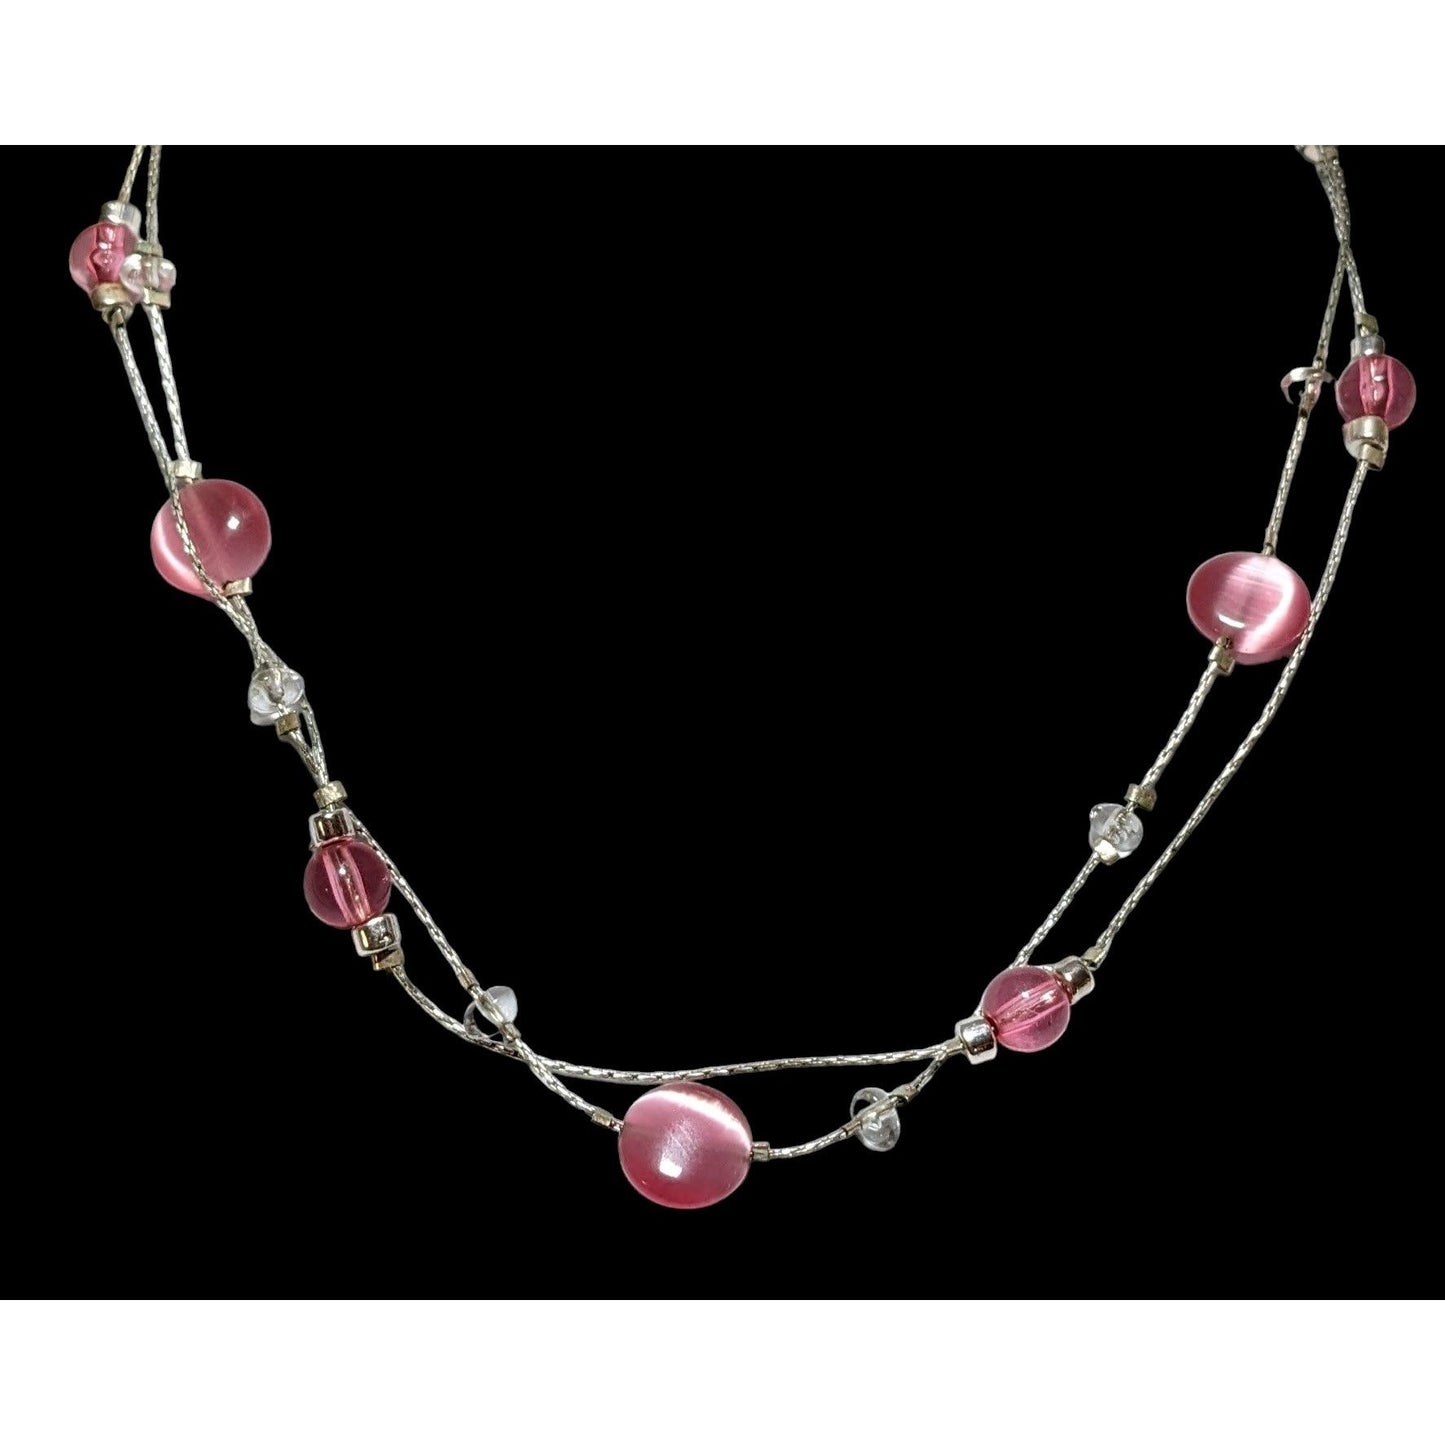 NY Pink And Silver Cateye Necklace